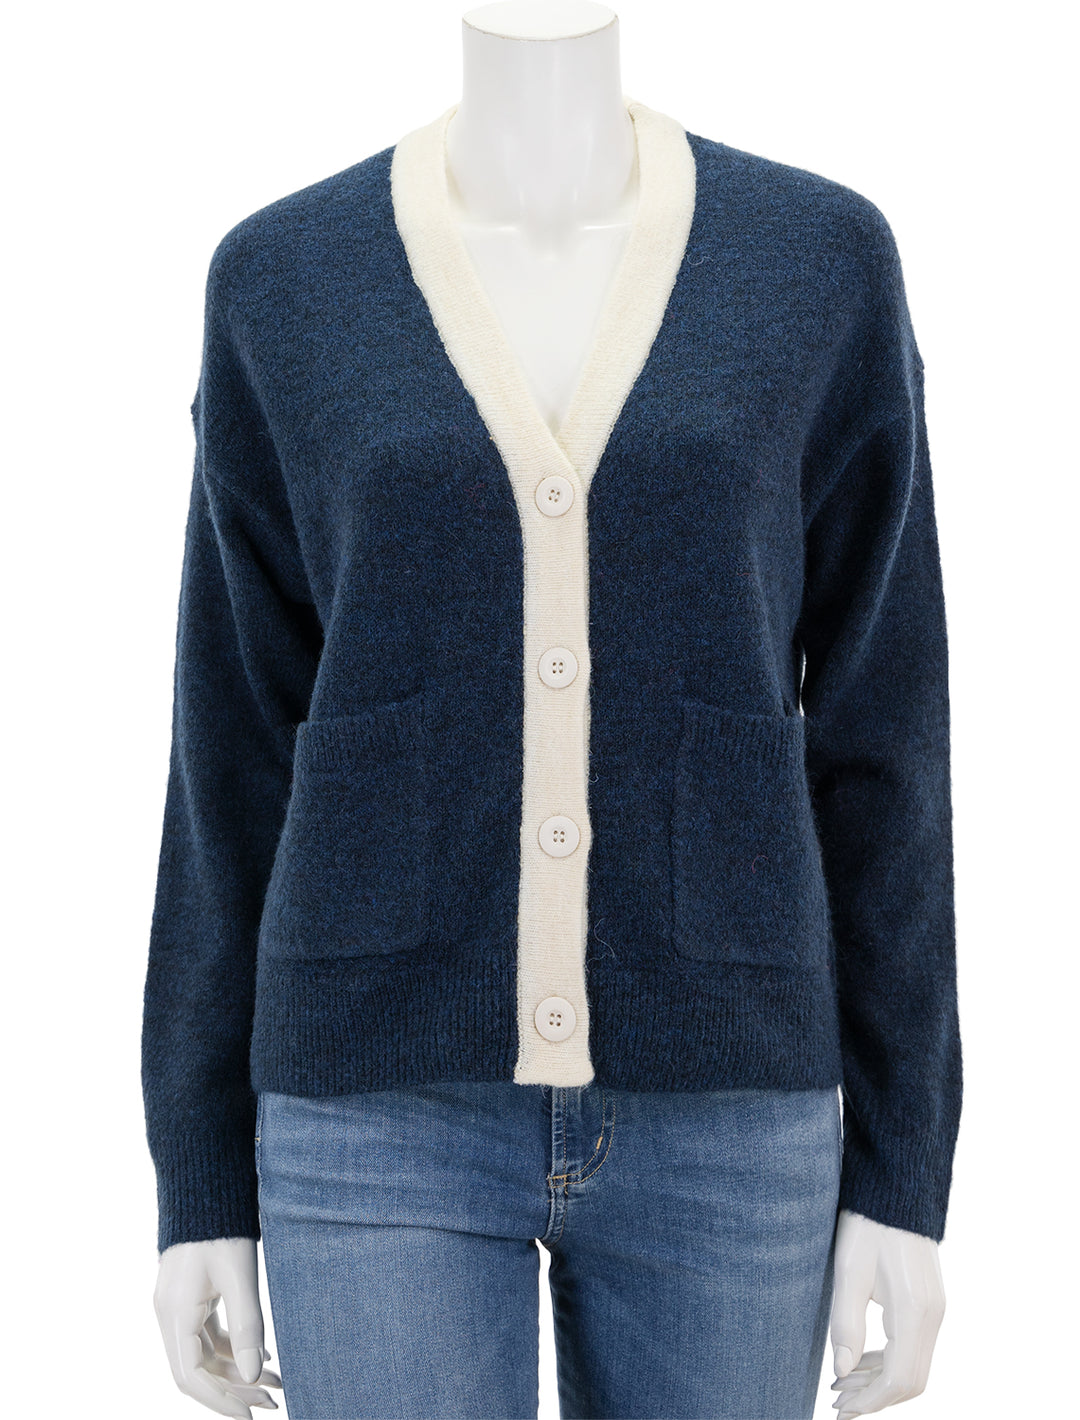 Front view of Sundry's heart boxy cardigan in midnight and cream.